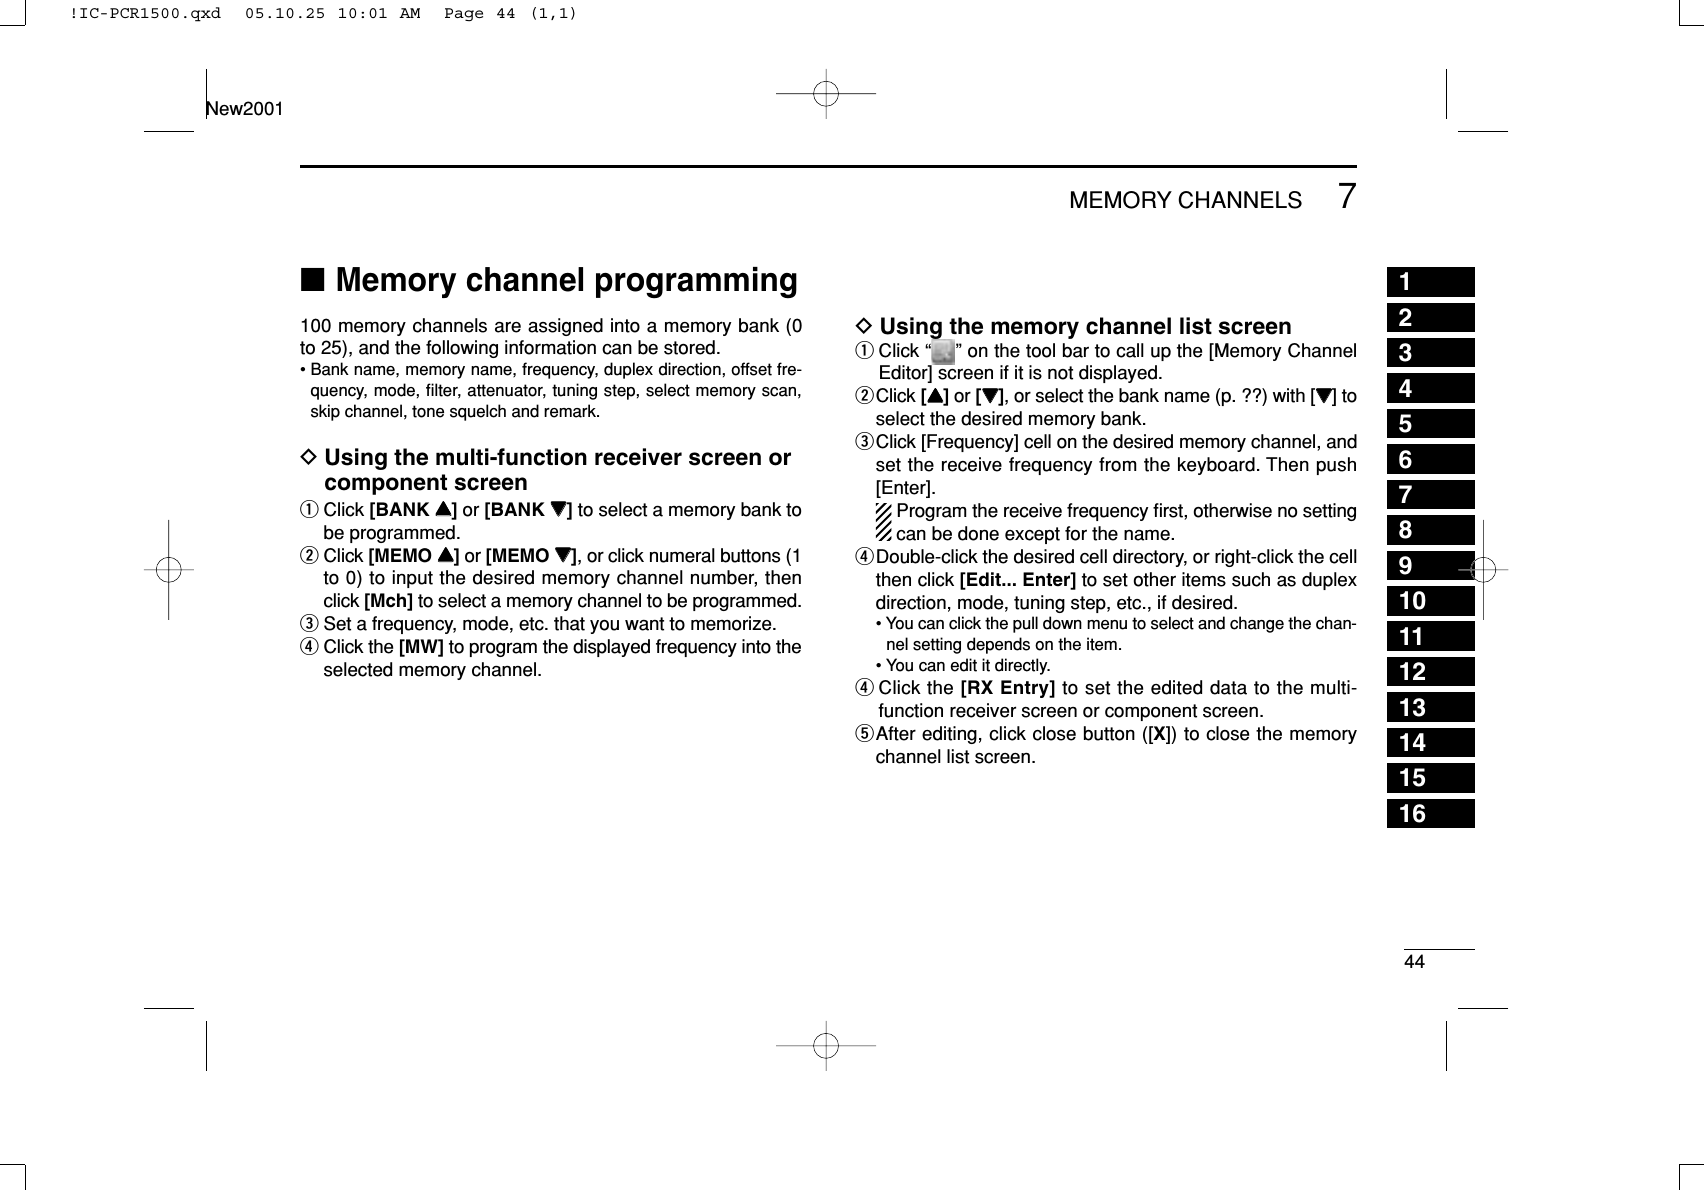 447MEMORY CHANNELSNew200112345678910111213141516■Memory channel programming100 memory channels are assigned into a memory bank (0to 25), and the following information can be stored.• Bank name, memory name, frequency, duplex direction, offset fre-quency, mode, ﬁlter, attenuator, tuning step, select memory scan,skip channel, tone squelch and remark.DUsing the multi-function receiver screen orcomponent screenqClick [BANK YY]or [BANK ZZ]to select a memory bank tobe programmed.wClick [MEMO YY]or [MEMO ZZ], or click numeral buttons (1to 0) to input the desired memory channel number, thenclick [Mch] to select a memory channel to be programmed.eSet a frequency, mode, etc. that you want to memorize.rClick the [MW] to program the displayed frequency into theselected memory channel.DUsing the memory channel list screenqClick “ ” on the tool bar to call up the [Memory ChannelEditor] screen if it is not displayed.wClick [YY]or [ZZ], or select the bank name (p. ??) with [ZZ] toselect the desired memory bank.eClick [Frequency] cell on the desired memory channel, andset the receive frequency from the keyboard. Then push[Enter].Program the receive frequency ﬁrst, otherwise no settingcan be done except for the name.rDouble-click the desired cell directory, or right-click the cellthen click [Edit... Enter] to set other items such as duplexdirection, mode, tuning step, etc., if desired.• You can click the pull down menu to select and change the chan-nel setting depends on the item.• You can edit it directly.rClick the [RX Entry] to set the edited data to the multi-function receiver screen or component screen.tAfter editing, click close button ([X]) to close the memorychannel list screen.!IC-PCR1500.qxd  05.10.25 10:01 AM  Page 44 (1,1)